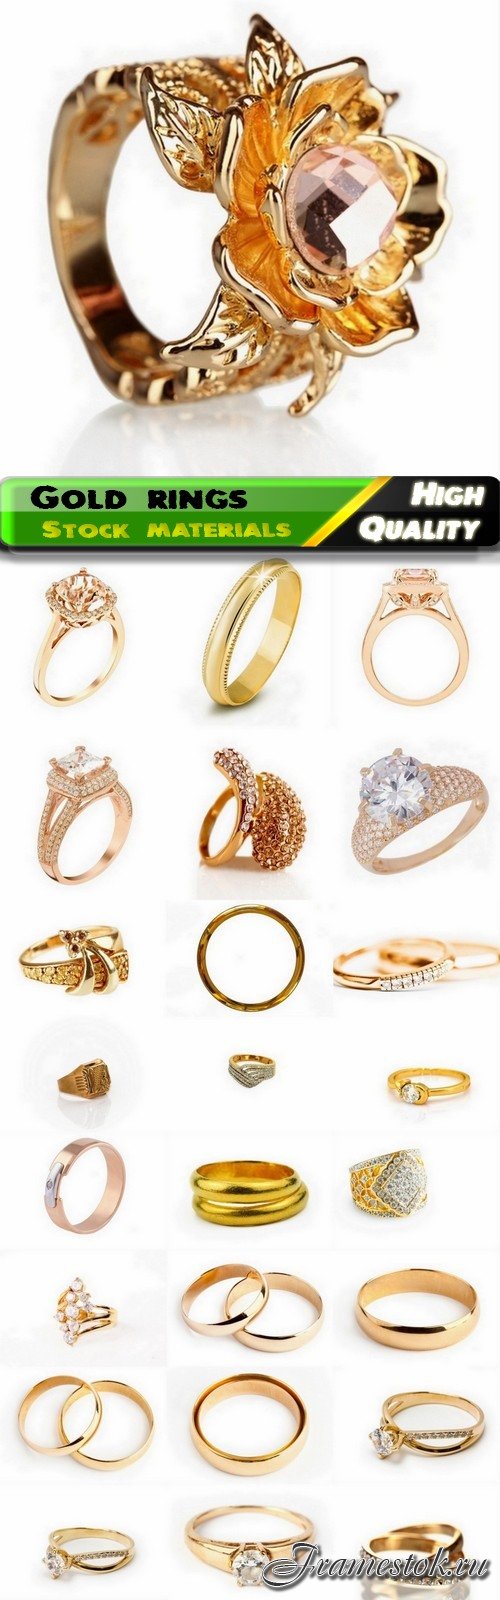 Gold rings with jewels and gems on white - 25 HQ Jpg